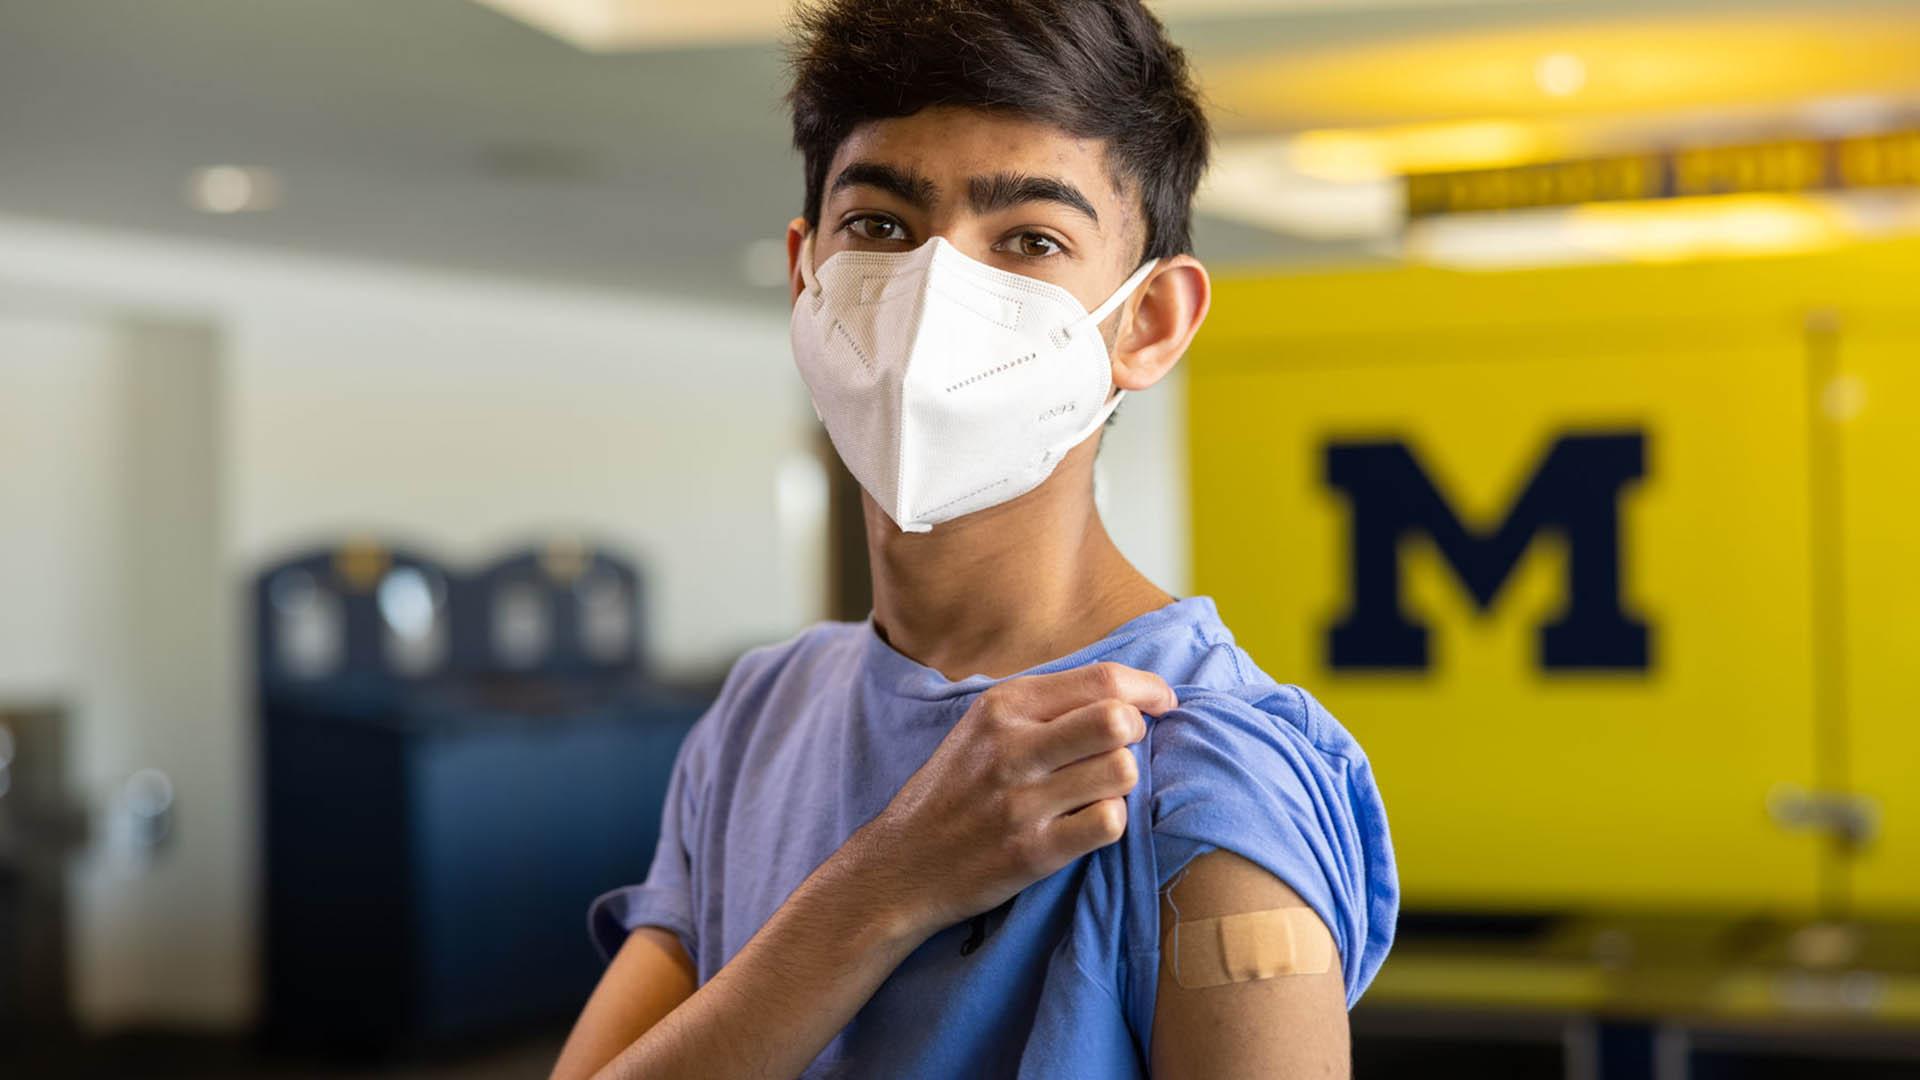 Teenage boy wearing mask and pulling up blue t-shirt to show bandage on upper arm